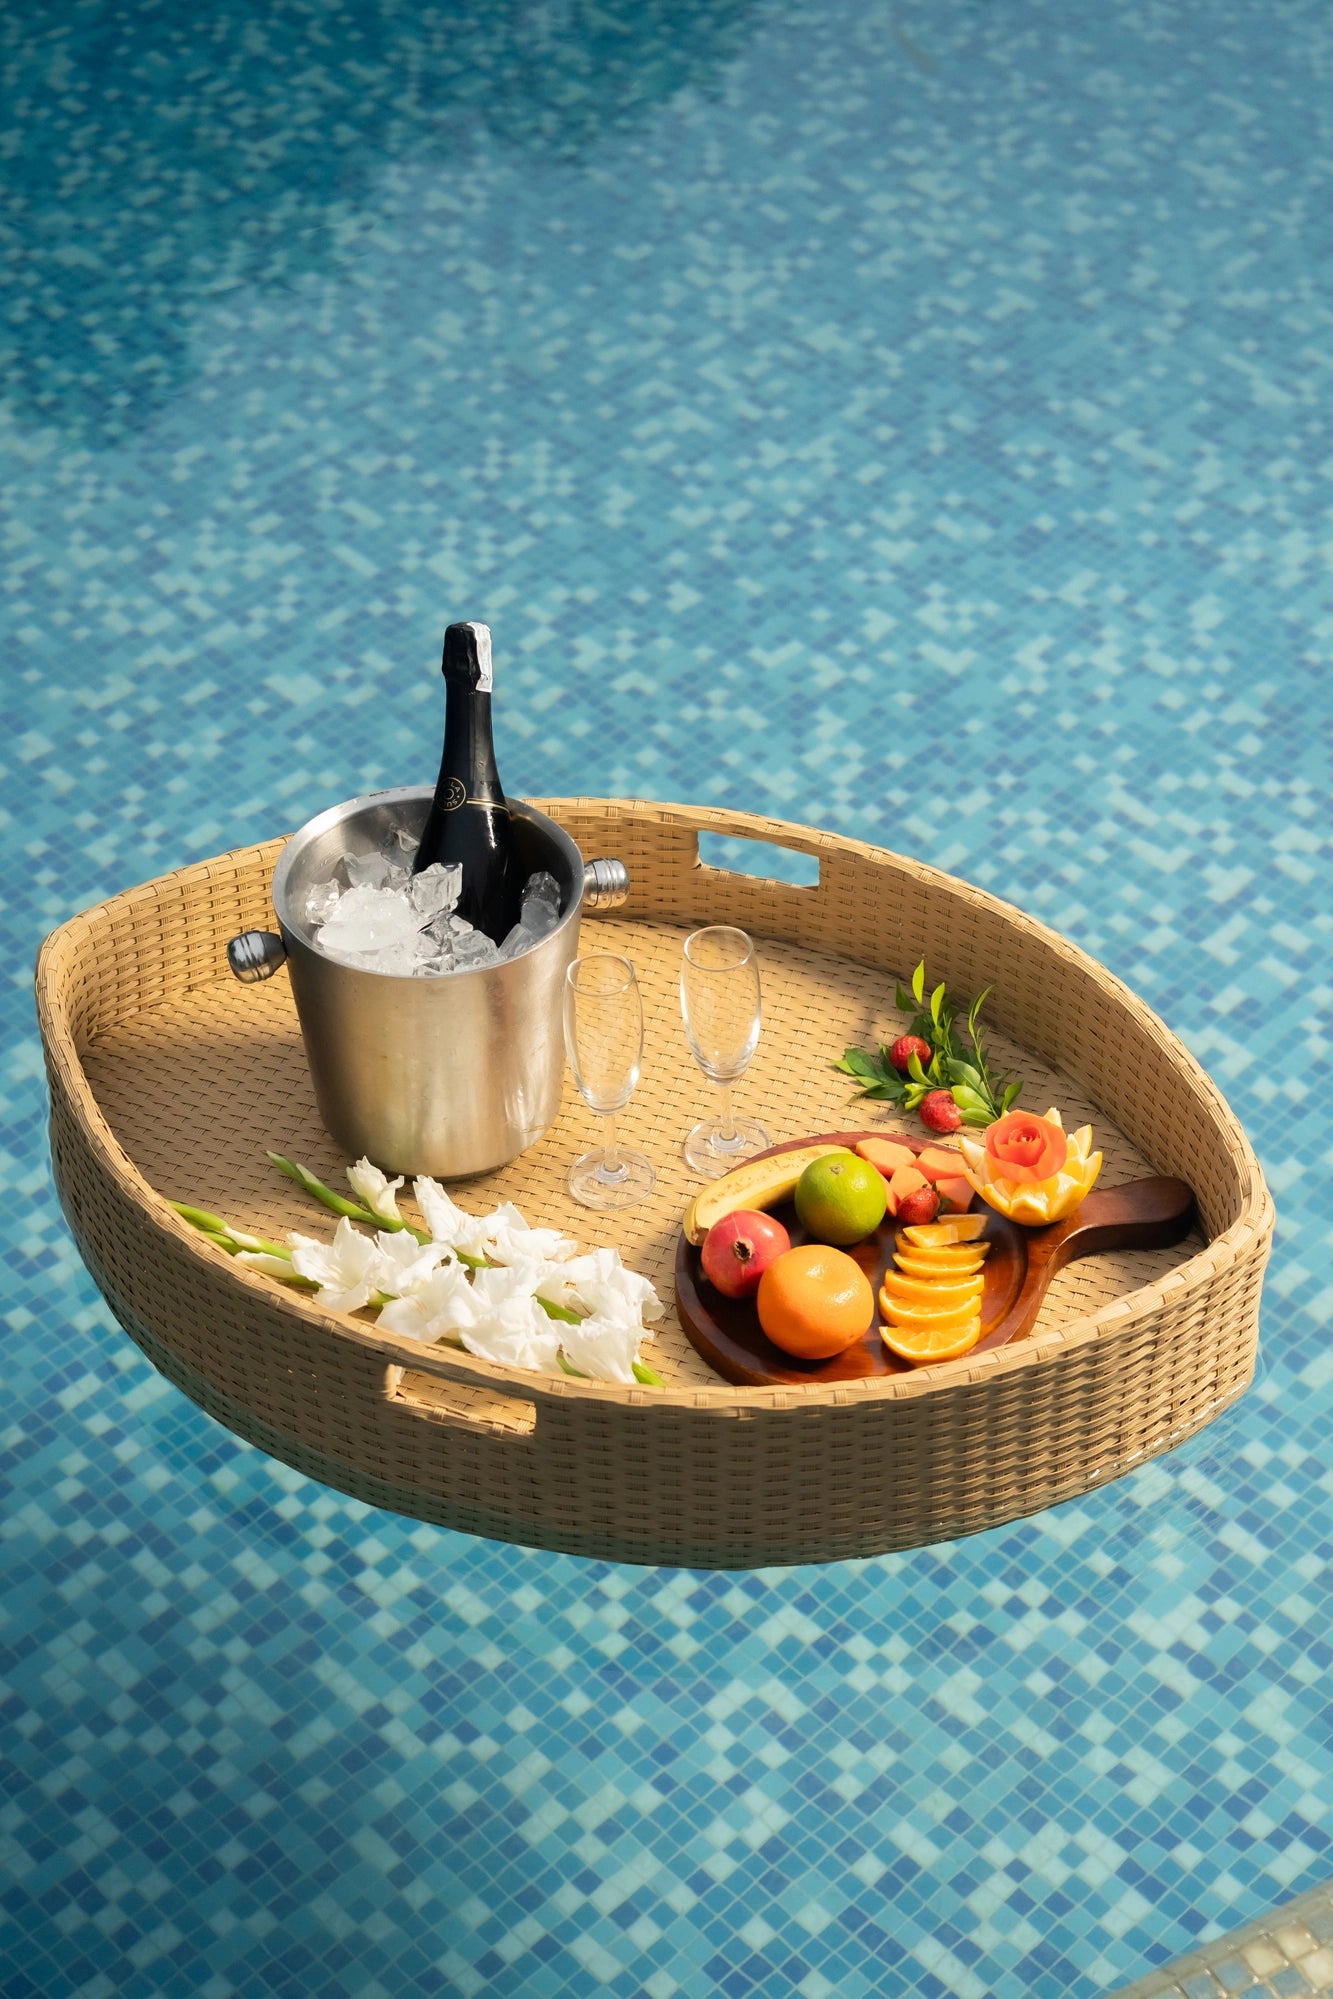 Floating breakfast tray Poolside luxury Pool party essentials Versatile pool floats Rattan style design Handcrafted in Bali Synthetic fibers Environmentally friendly Non-toxic materials Multiple uses Hot tub accessory Summer pool party Portable serving tray Resort amenities Unique guest experiences Luxury pool accessories Innovative hotel amenity tesu 